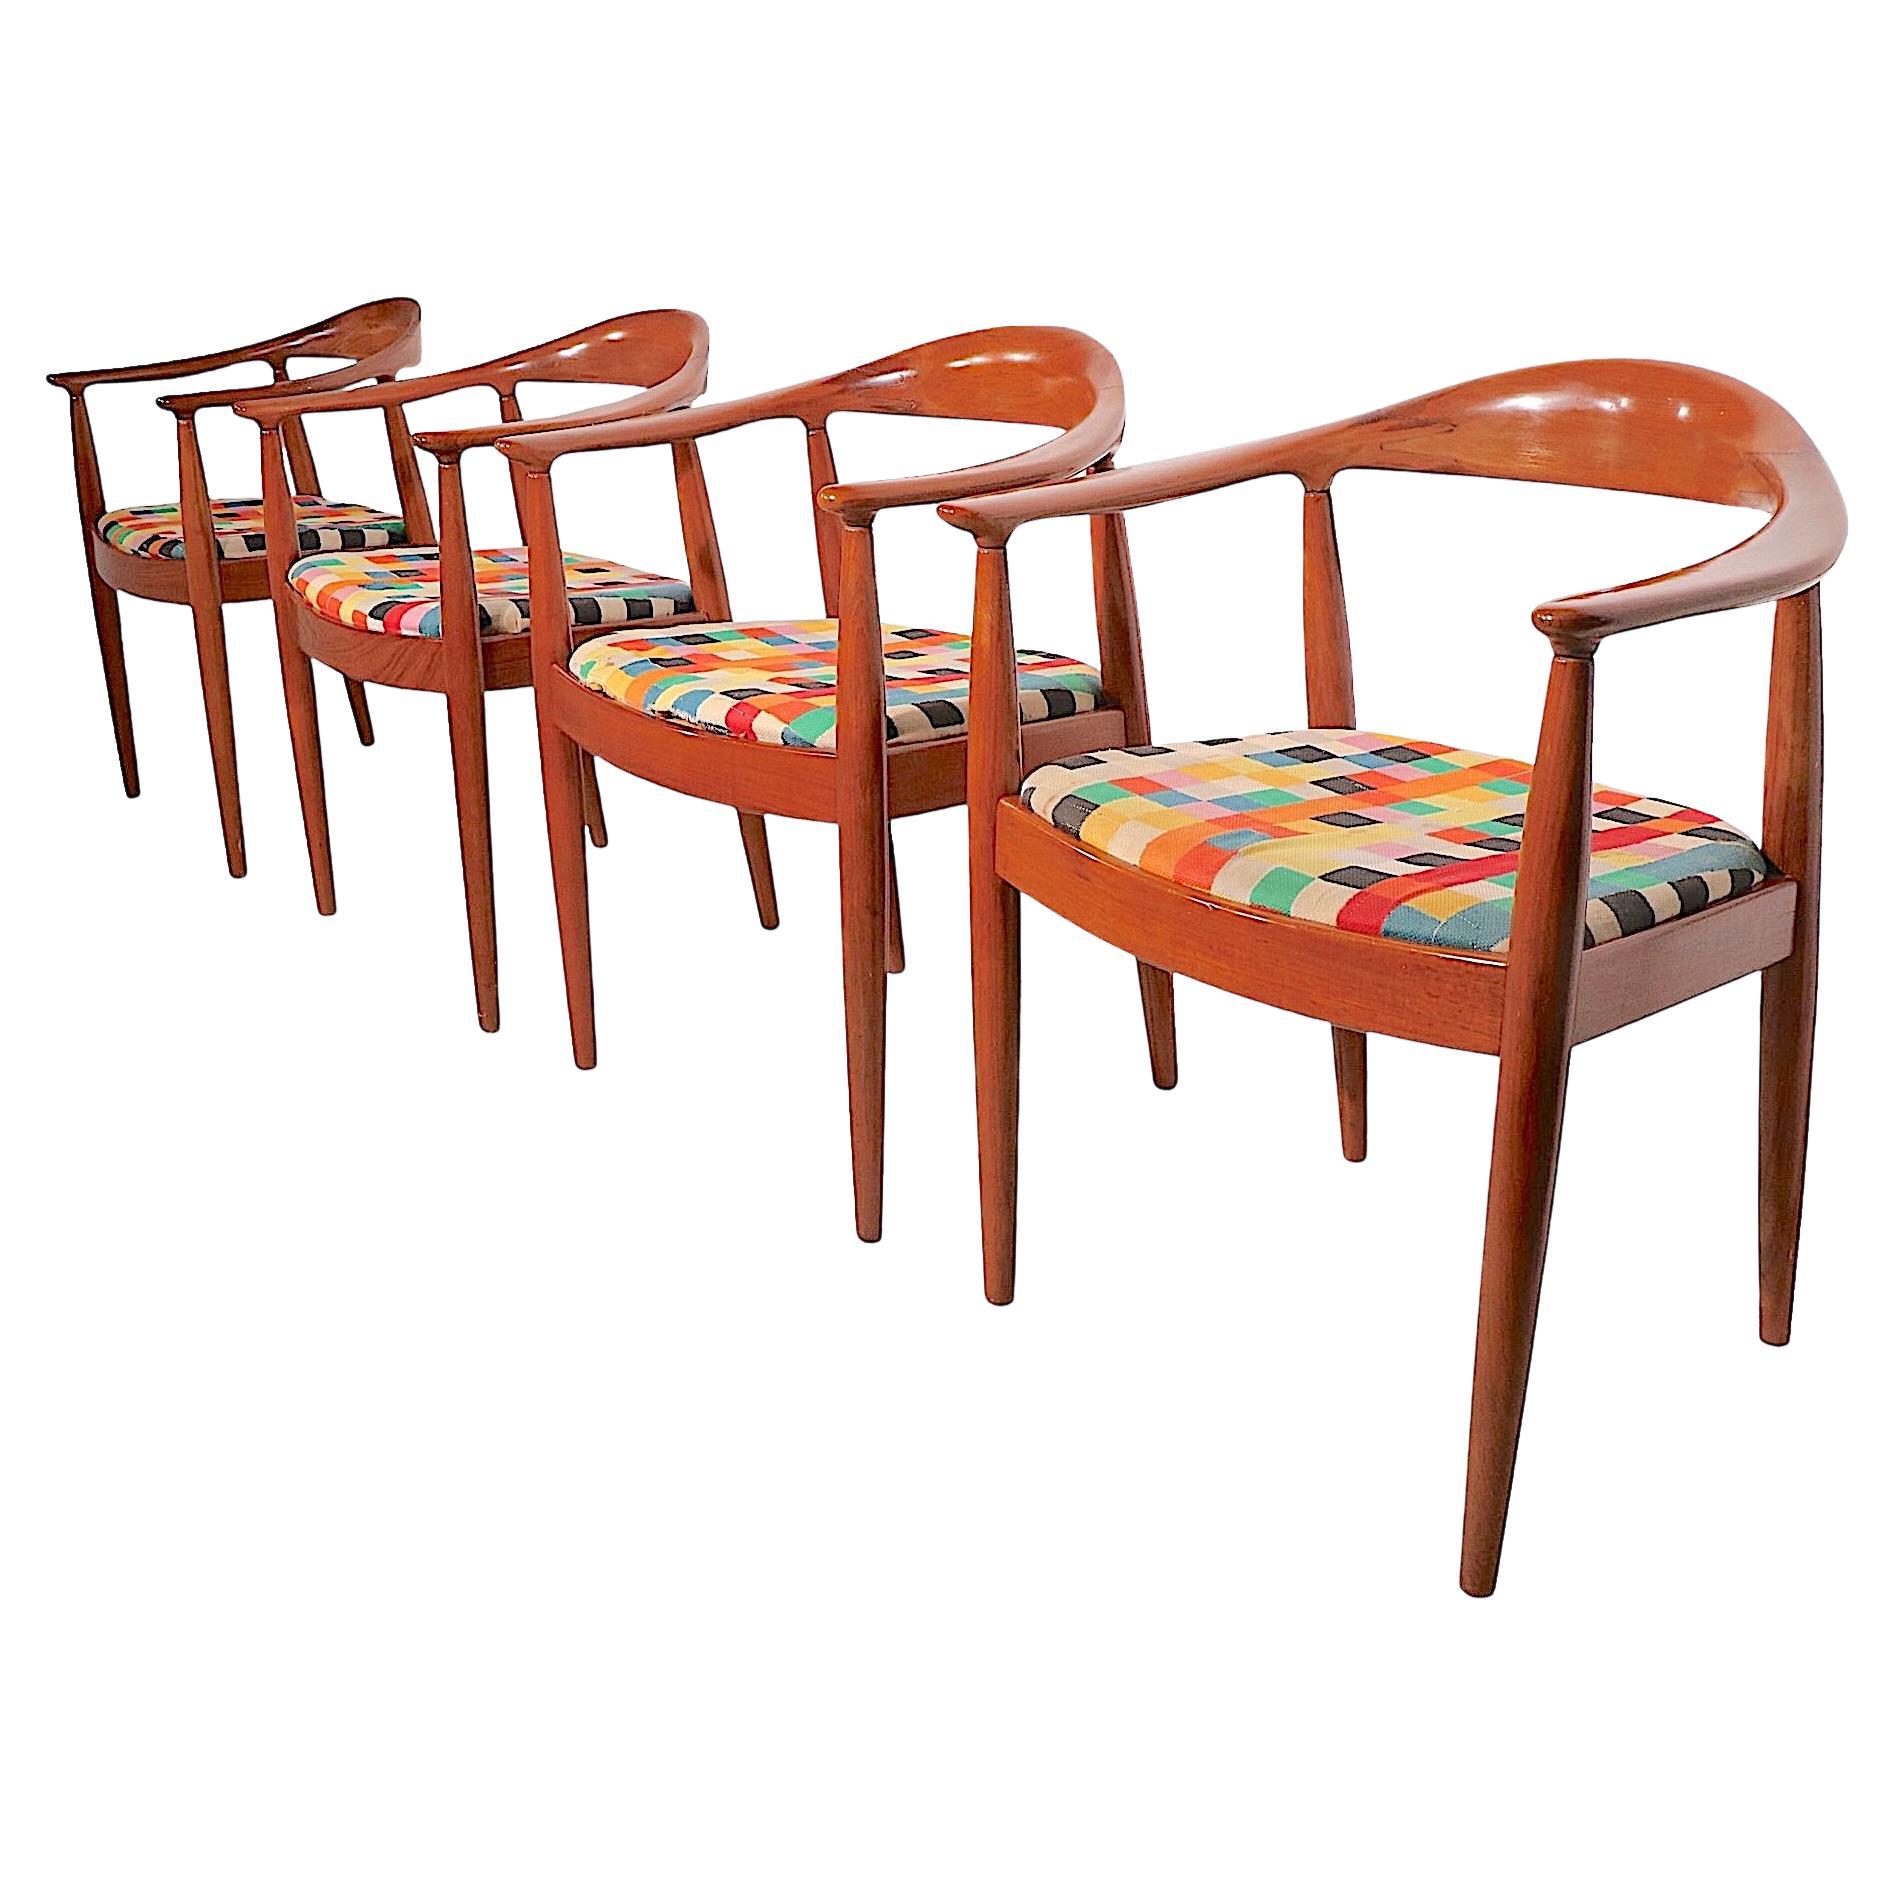 Set of Four Mid Century The Chair Model Chairs After Wegner For Sale